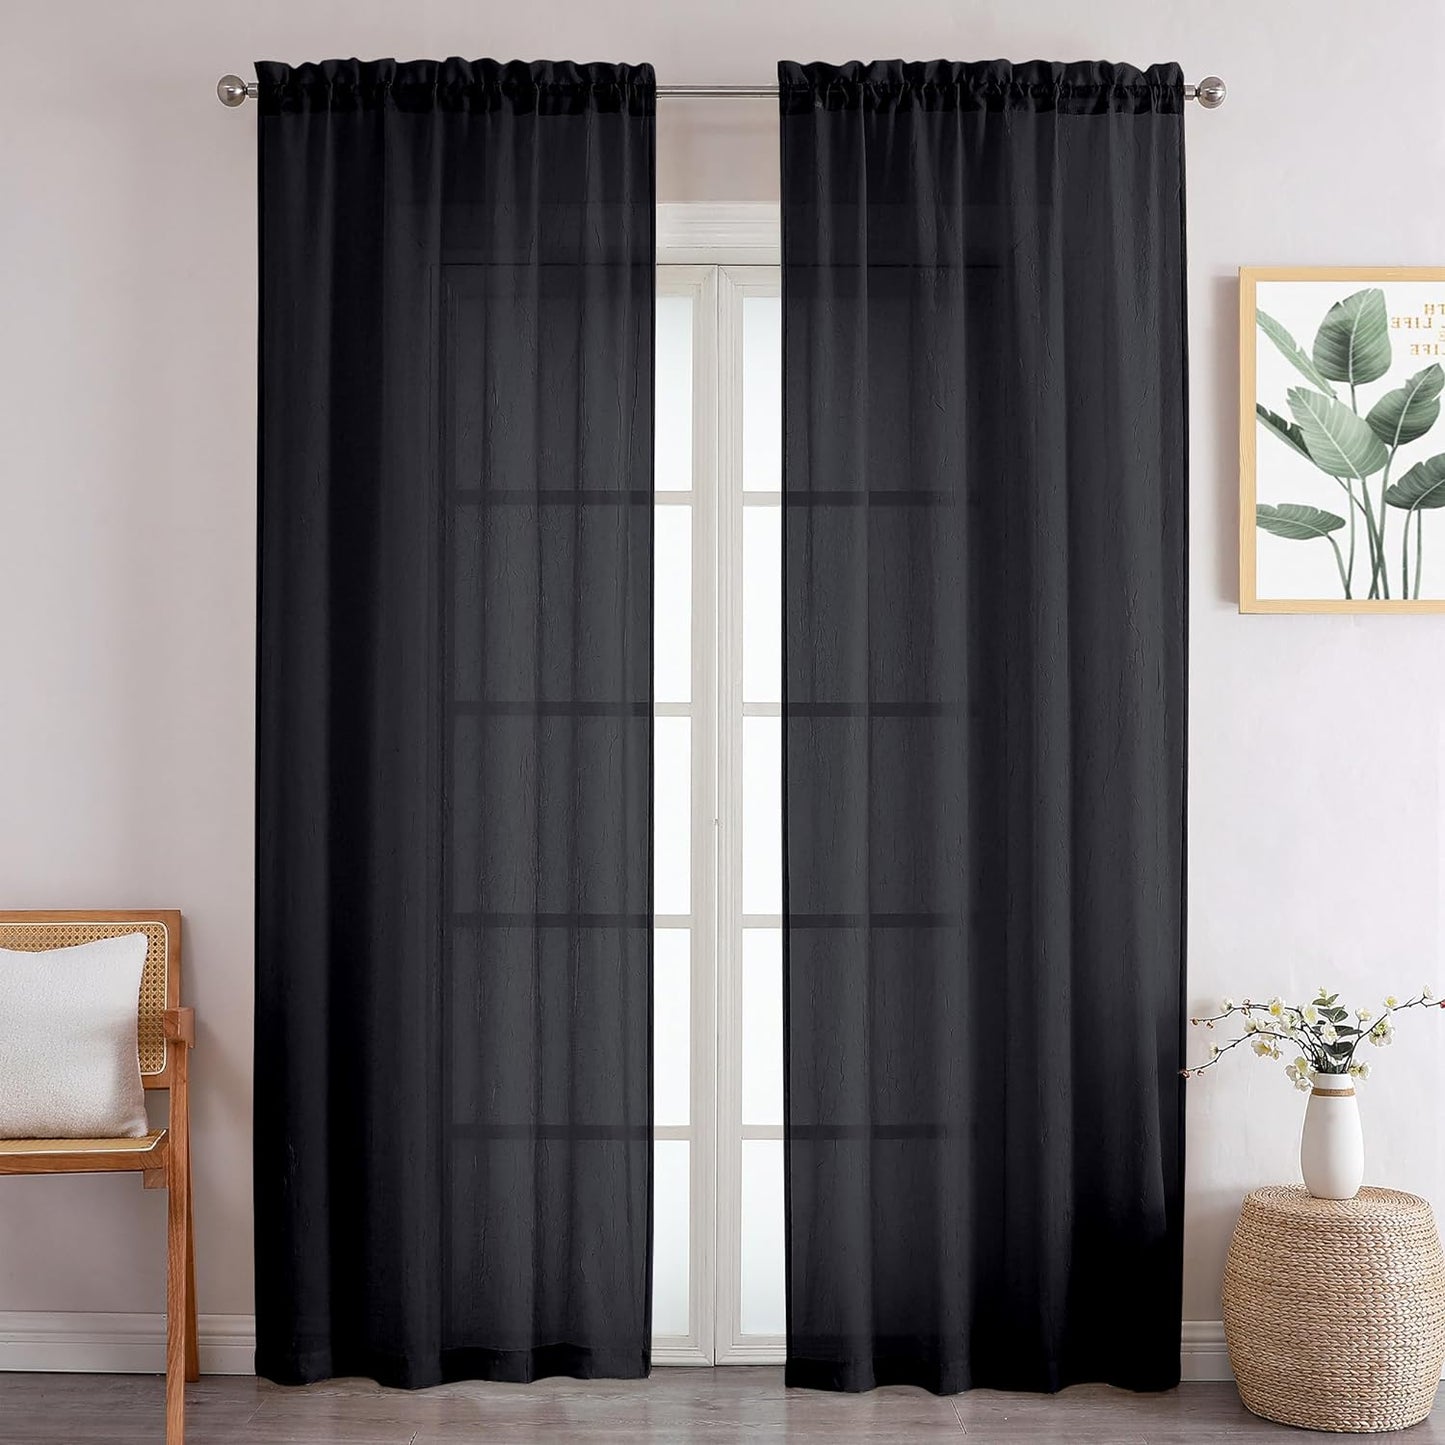 Crushed Sheer White Curtains 63 Inch Length 2 Panels, Light Filtering Solid Crinkle Voile Short Sheer Curtian for Bedroom Living Room, Each 42Wx63L Inches  Chyhomenyc Black 42 W X 96 L 